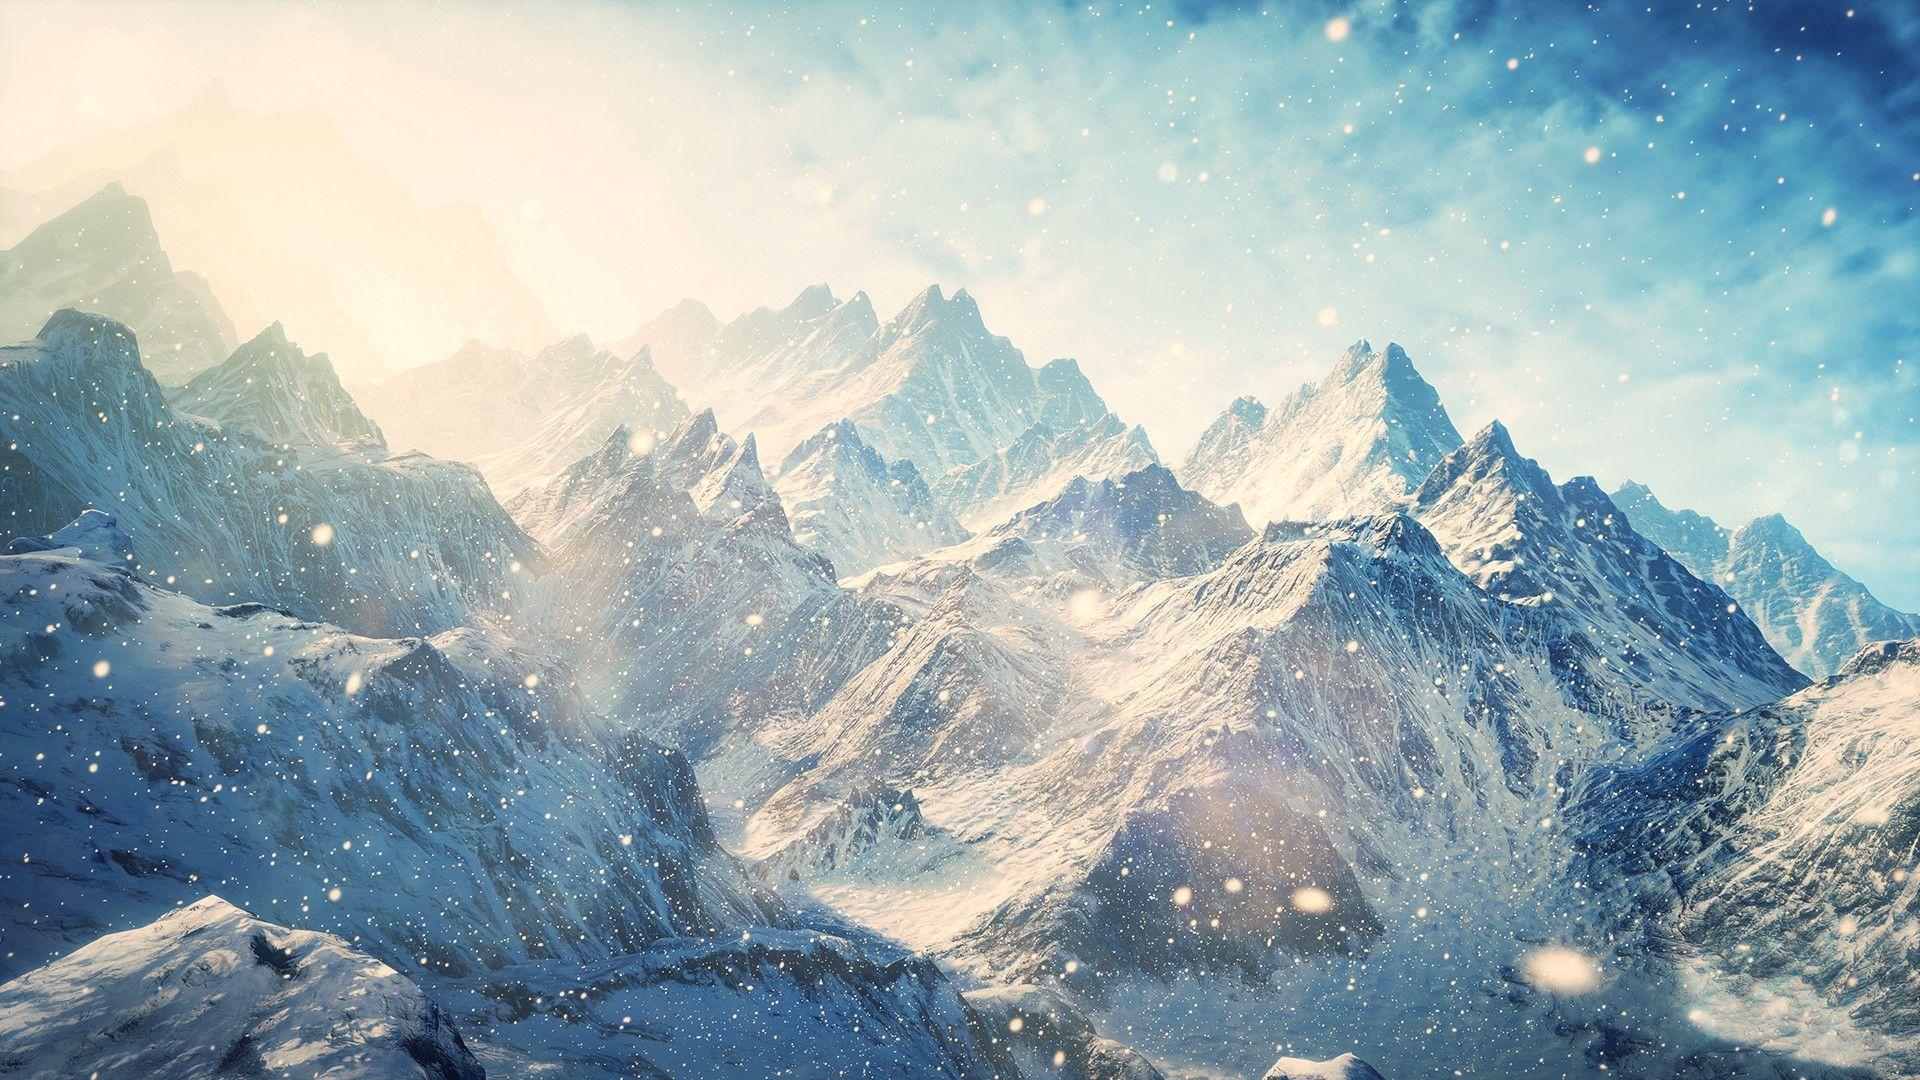 Winter Mountains With Snow HD Wallpaper FullHDWpp HD